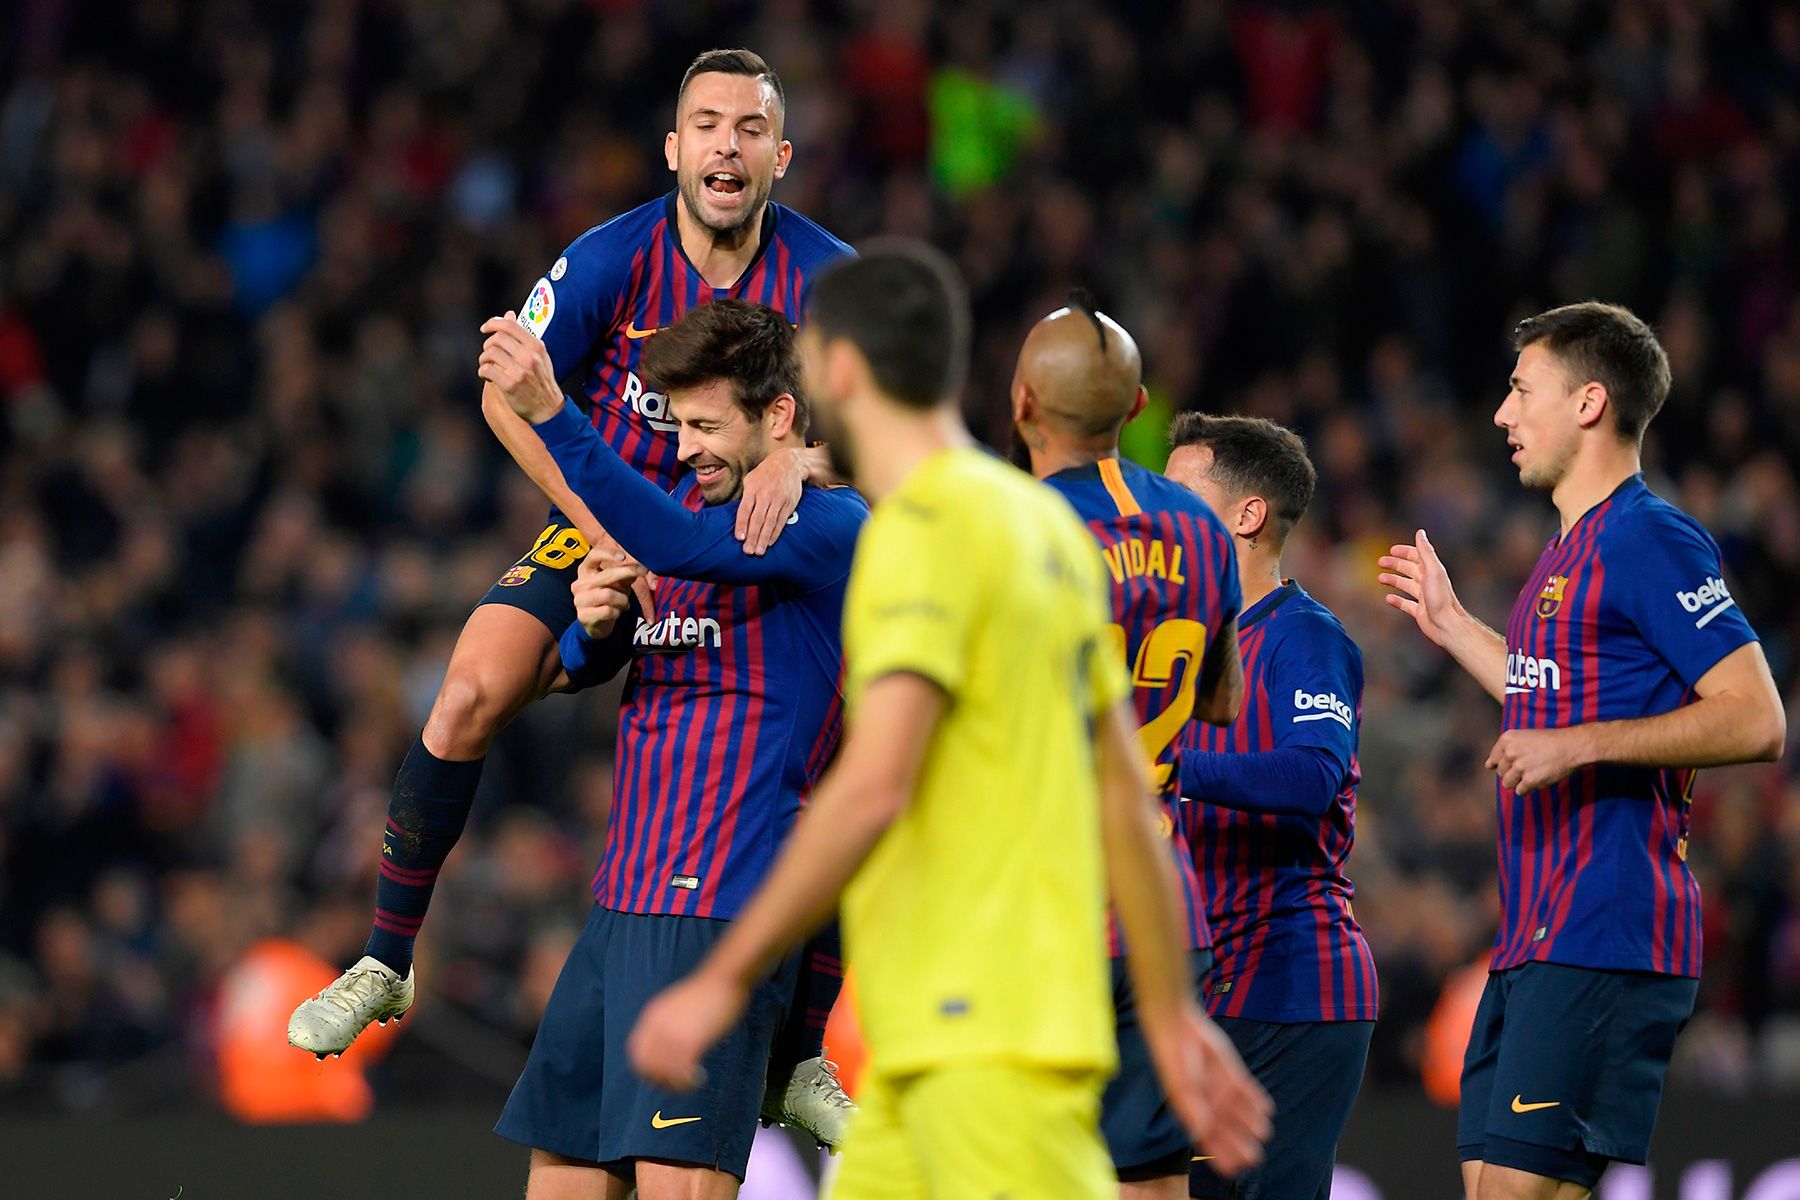 The players of the Barça celebrate a goal against the Villarreal